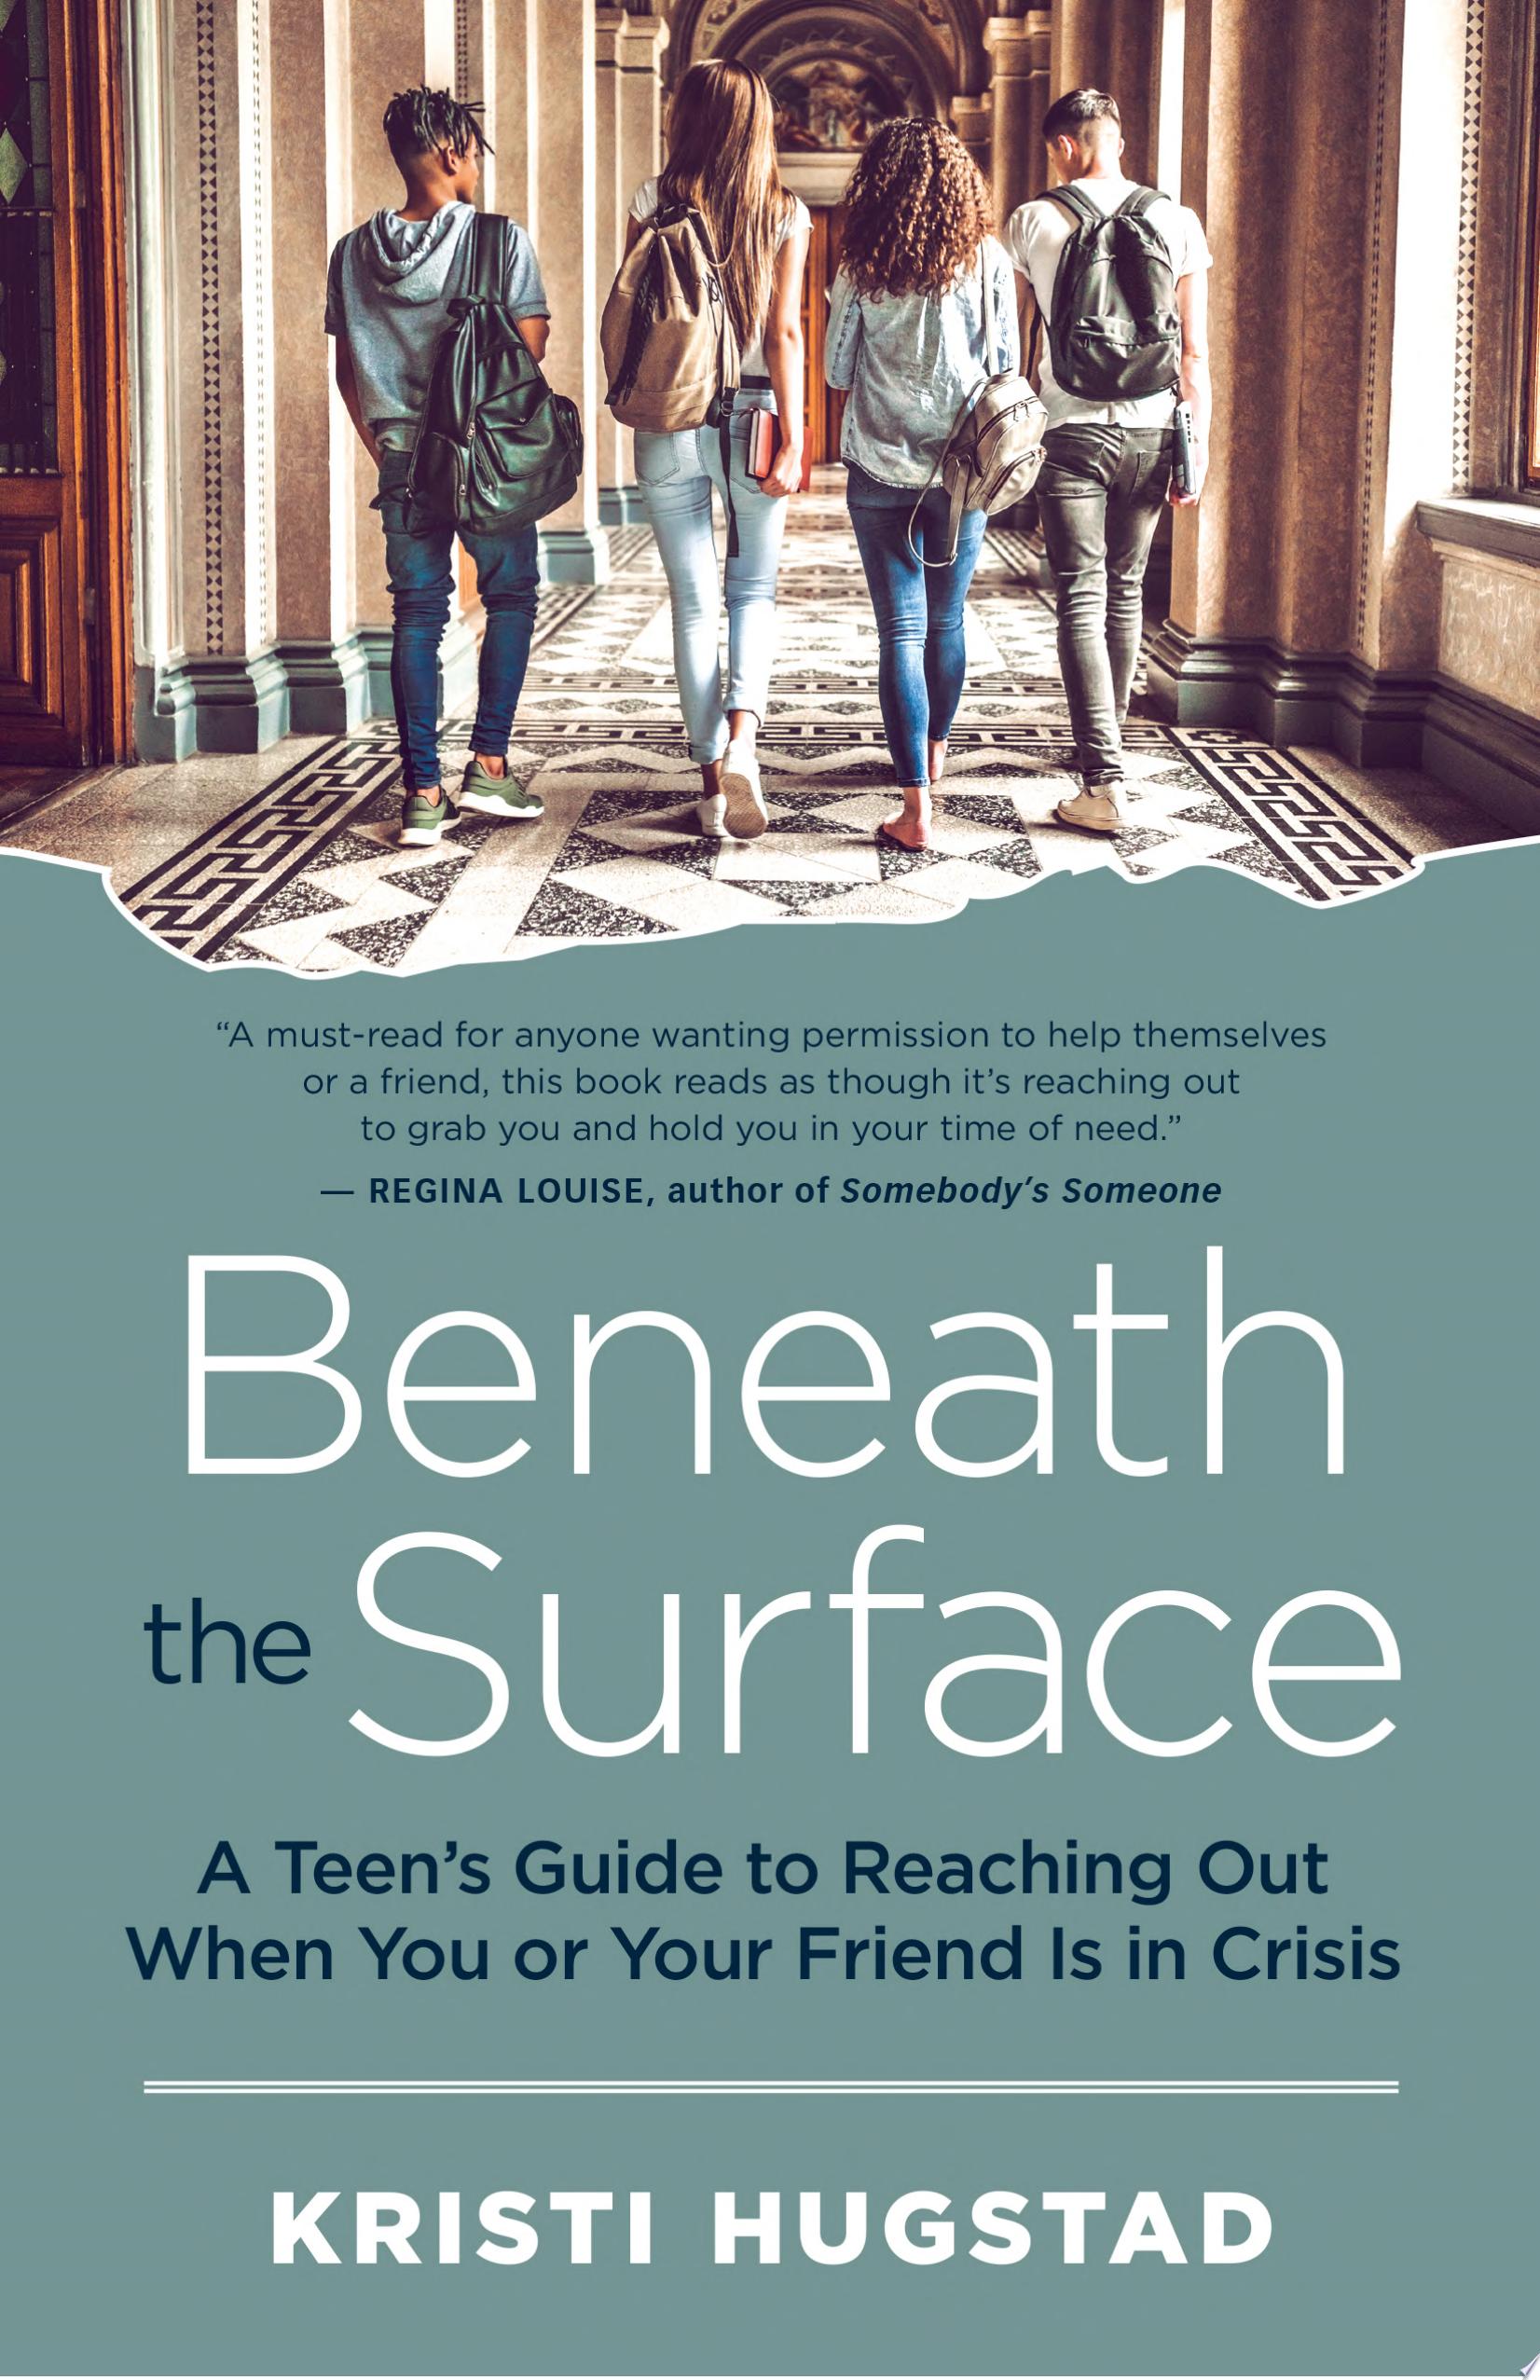 Image for "Beneath the Surface"